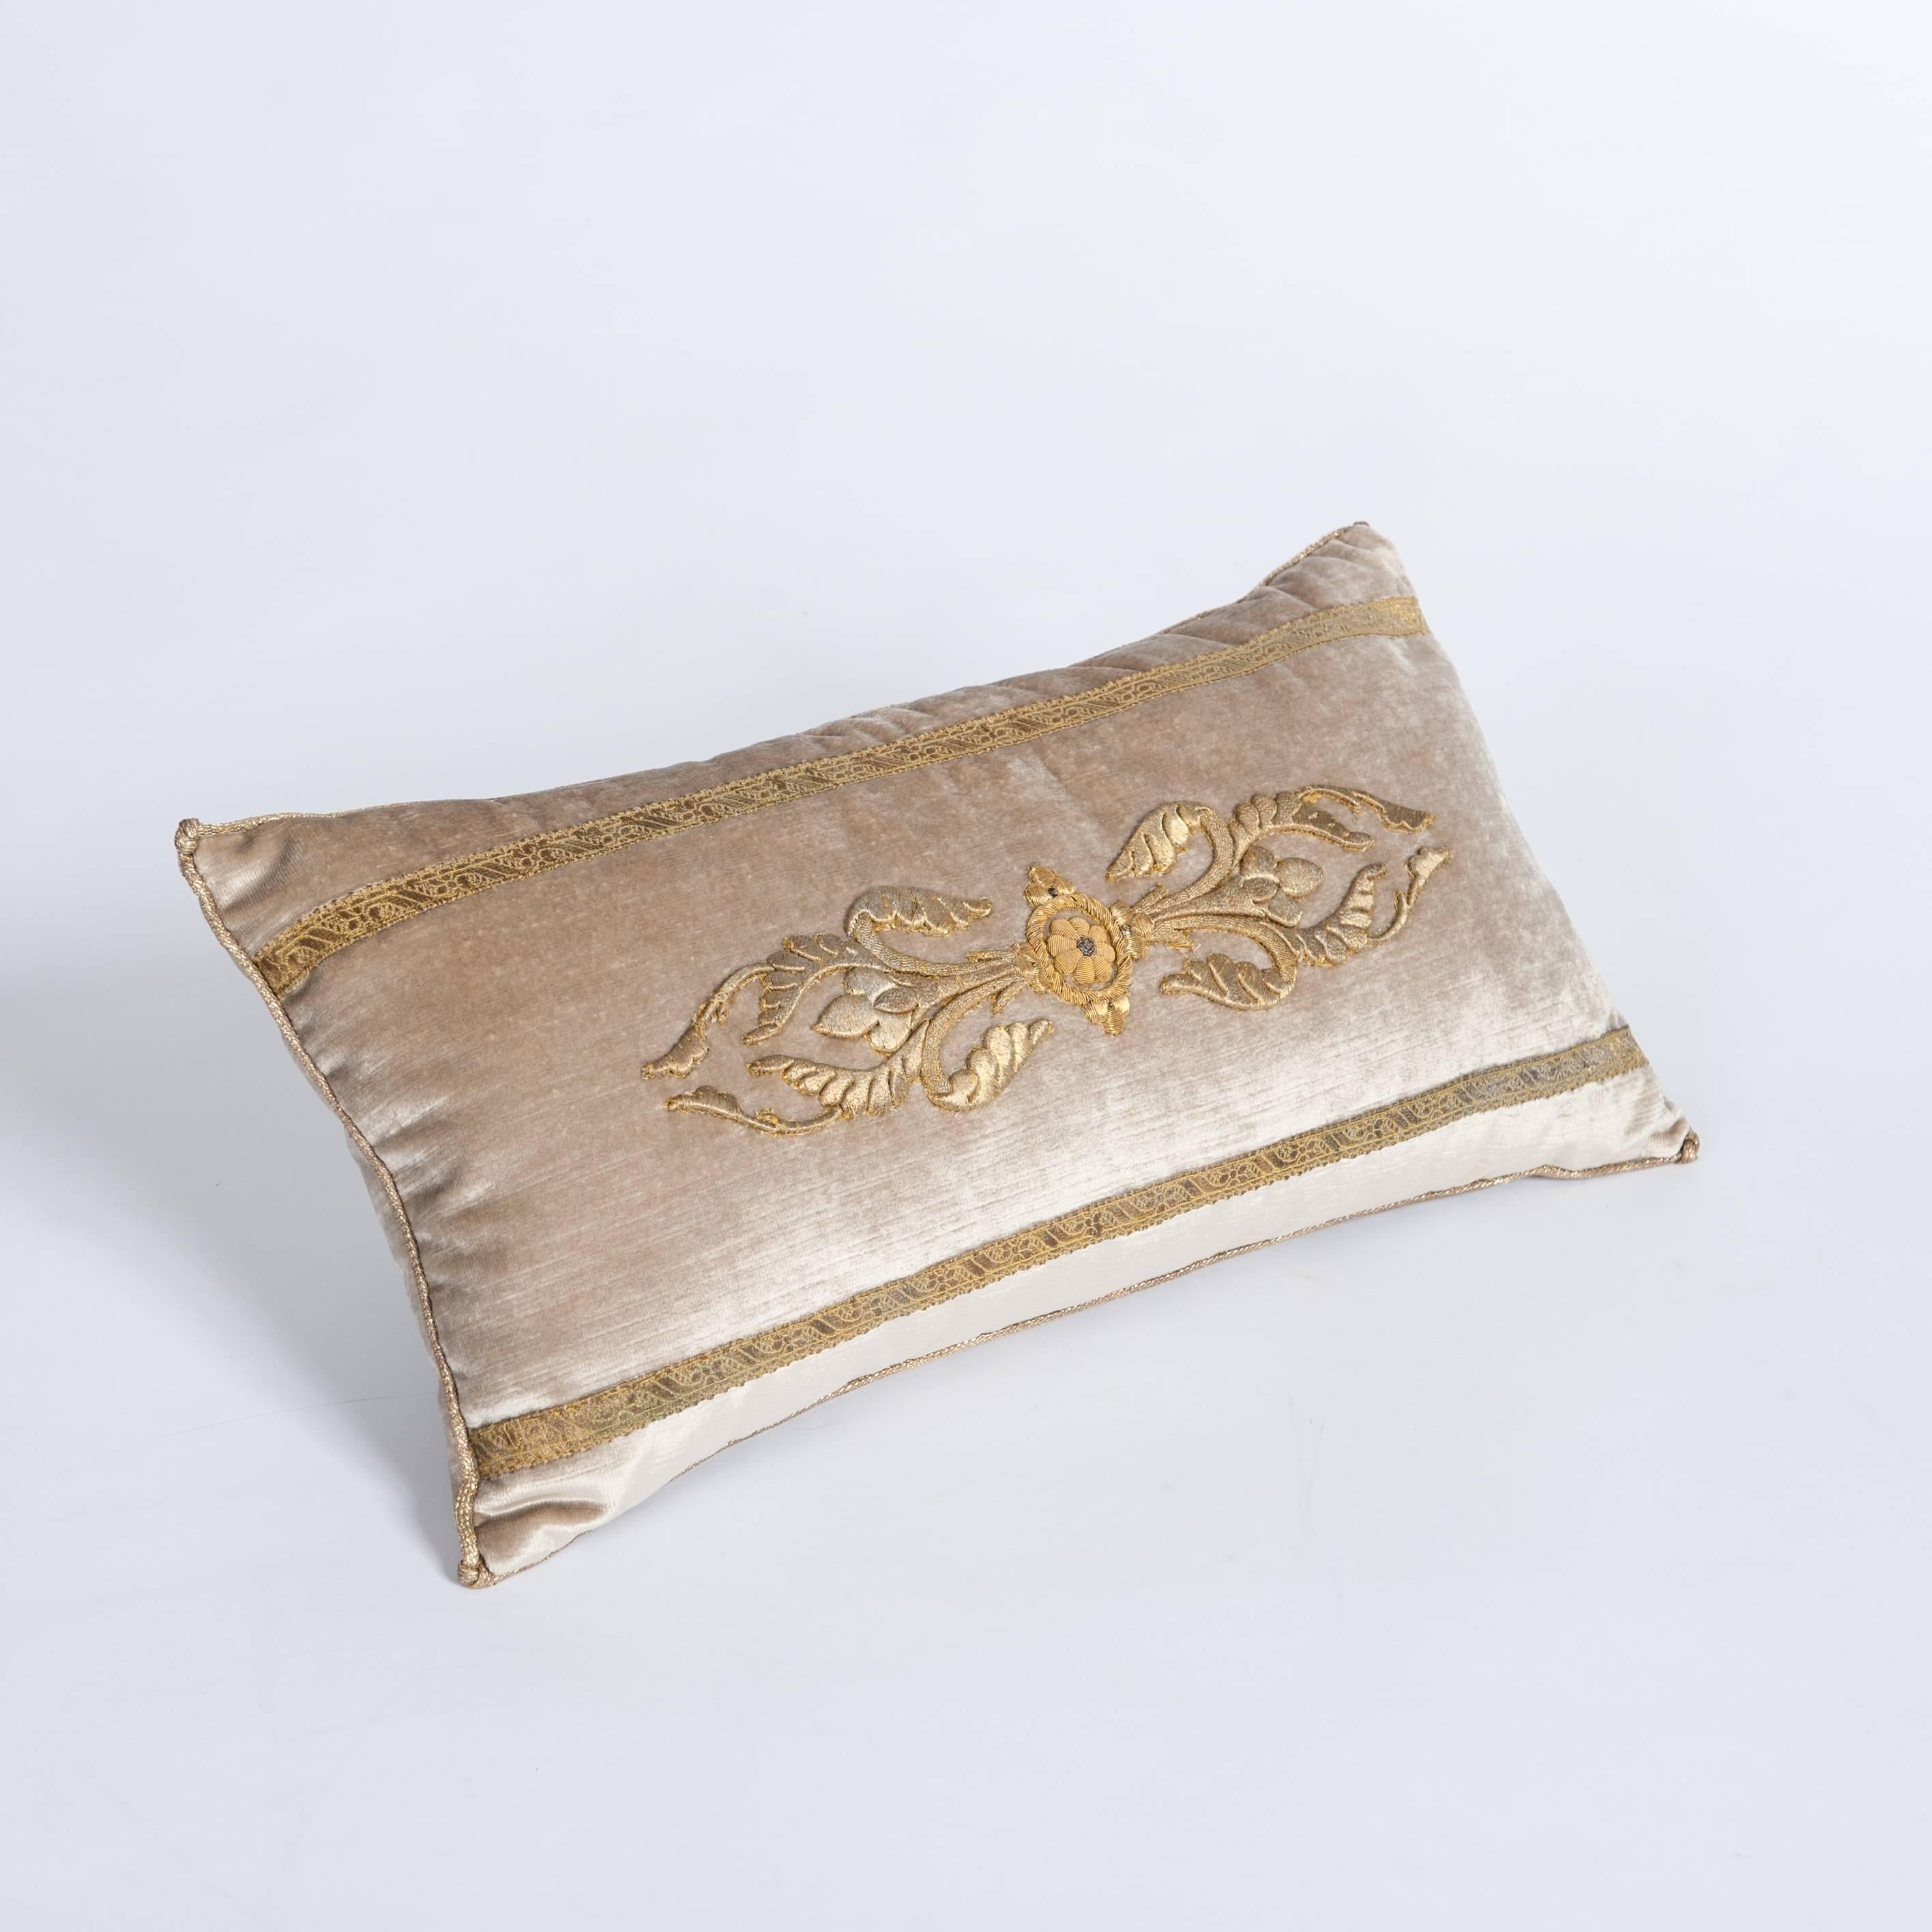 Hand-Crafted Pair of Champagne-Beige Colored Velvet Pillows with Antique Metallic Embroidery